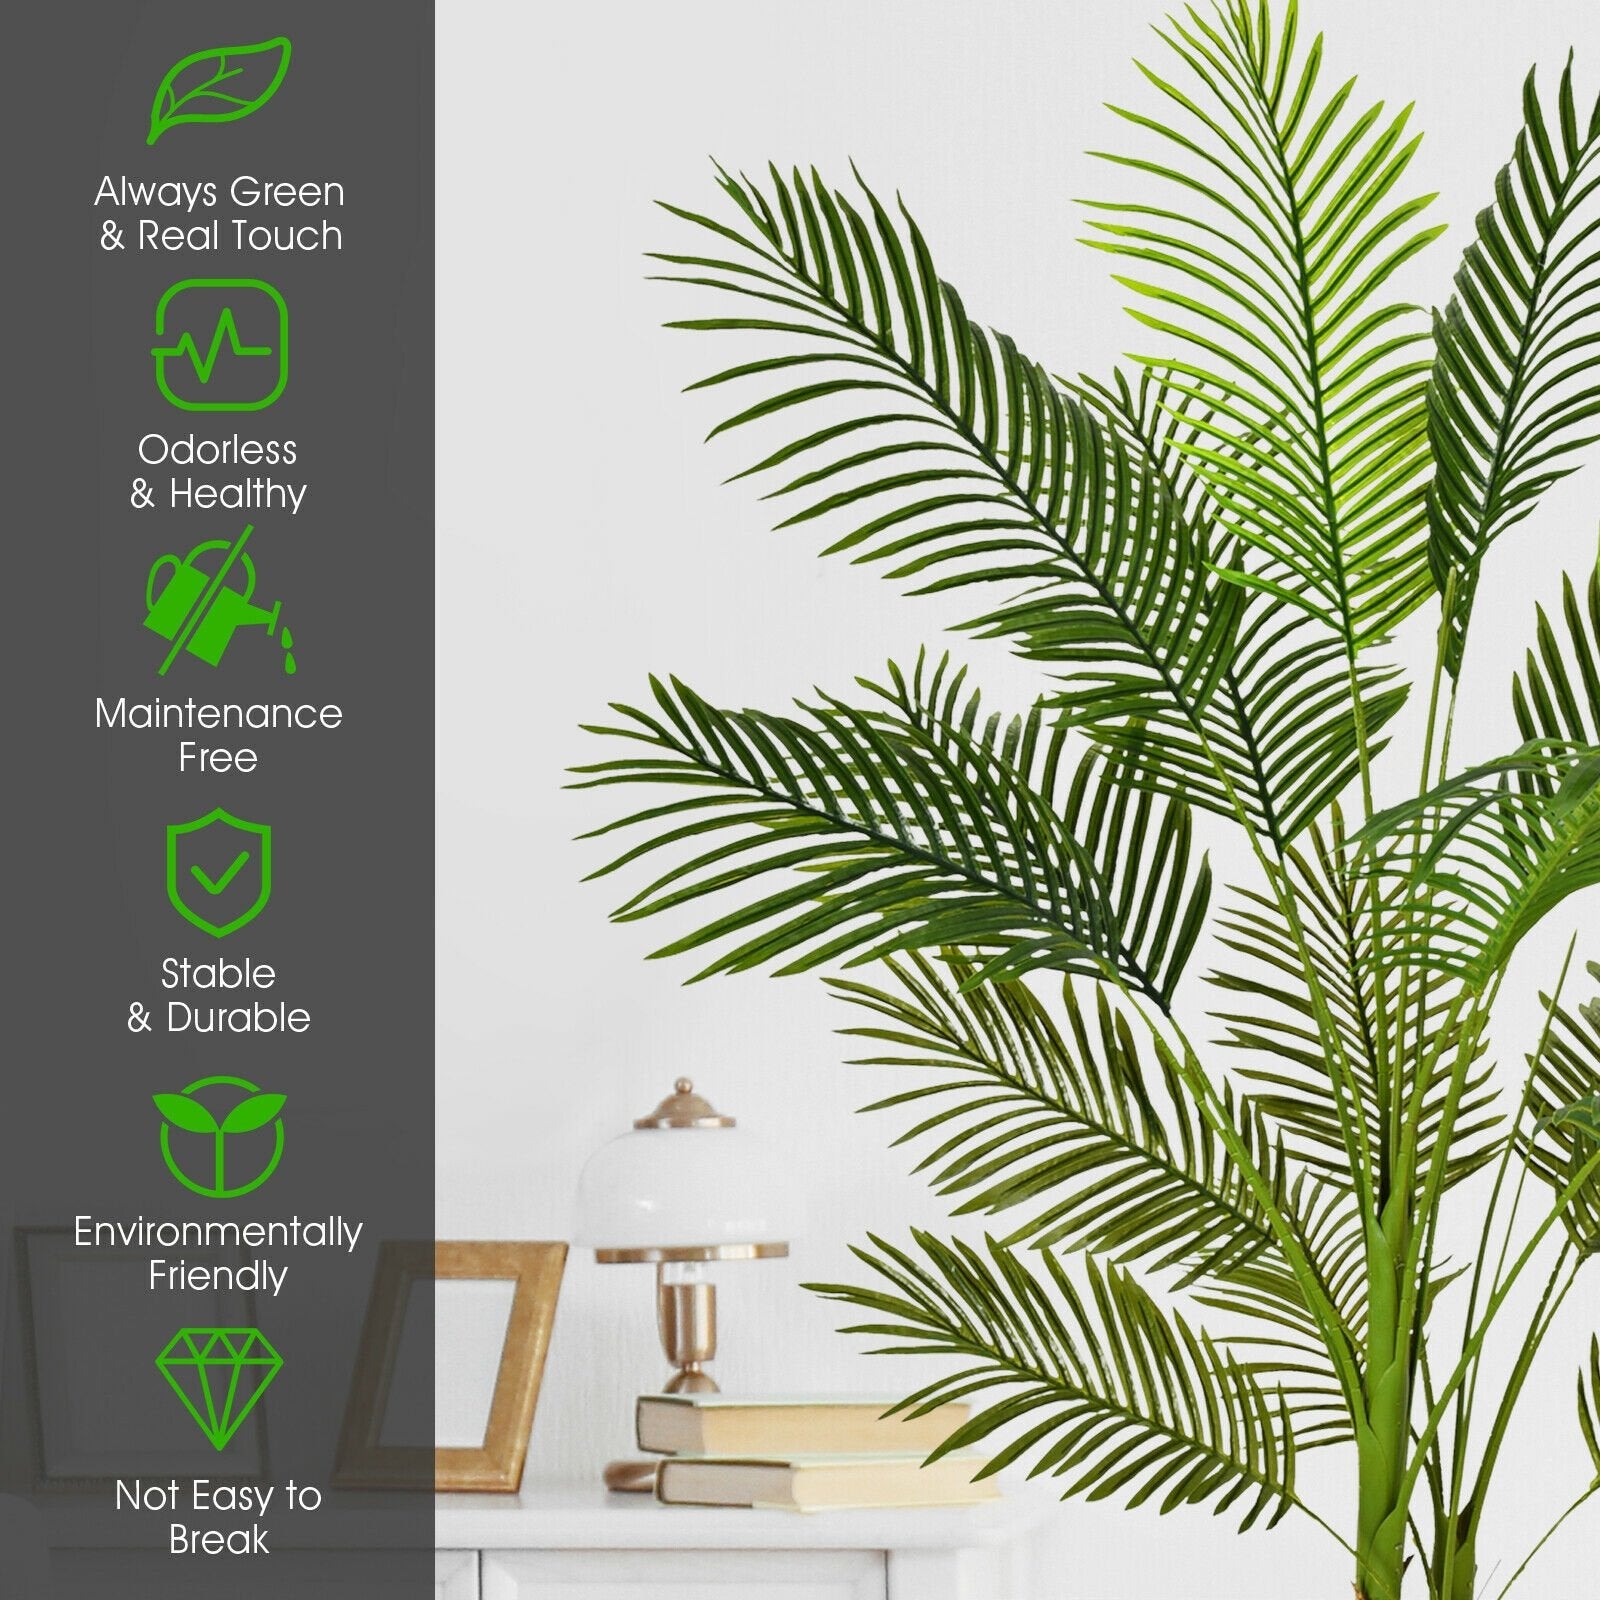 5 Feet Indoor Artificial Phoenix Palm Tree Plant, Green at Gallery Canada